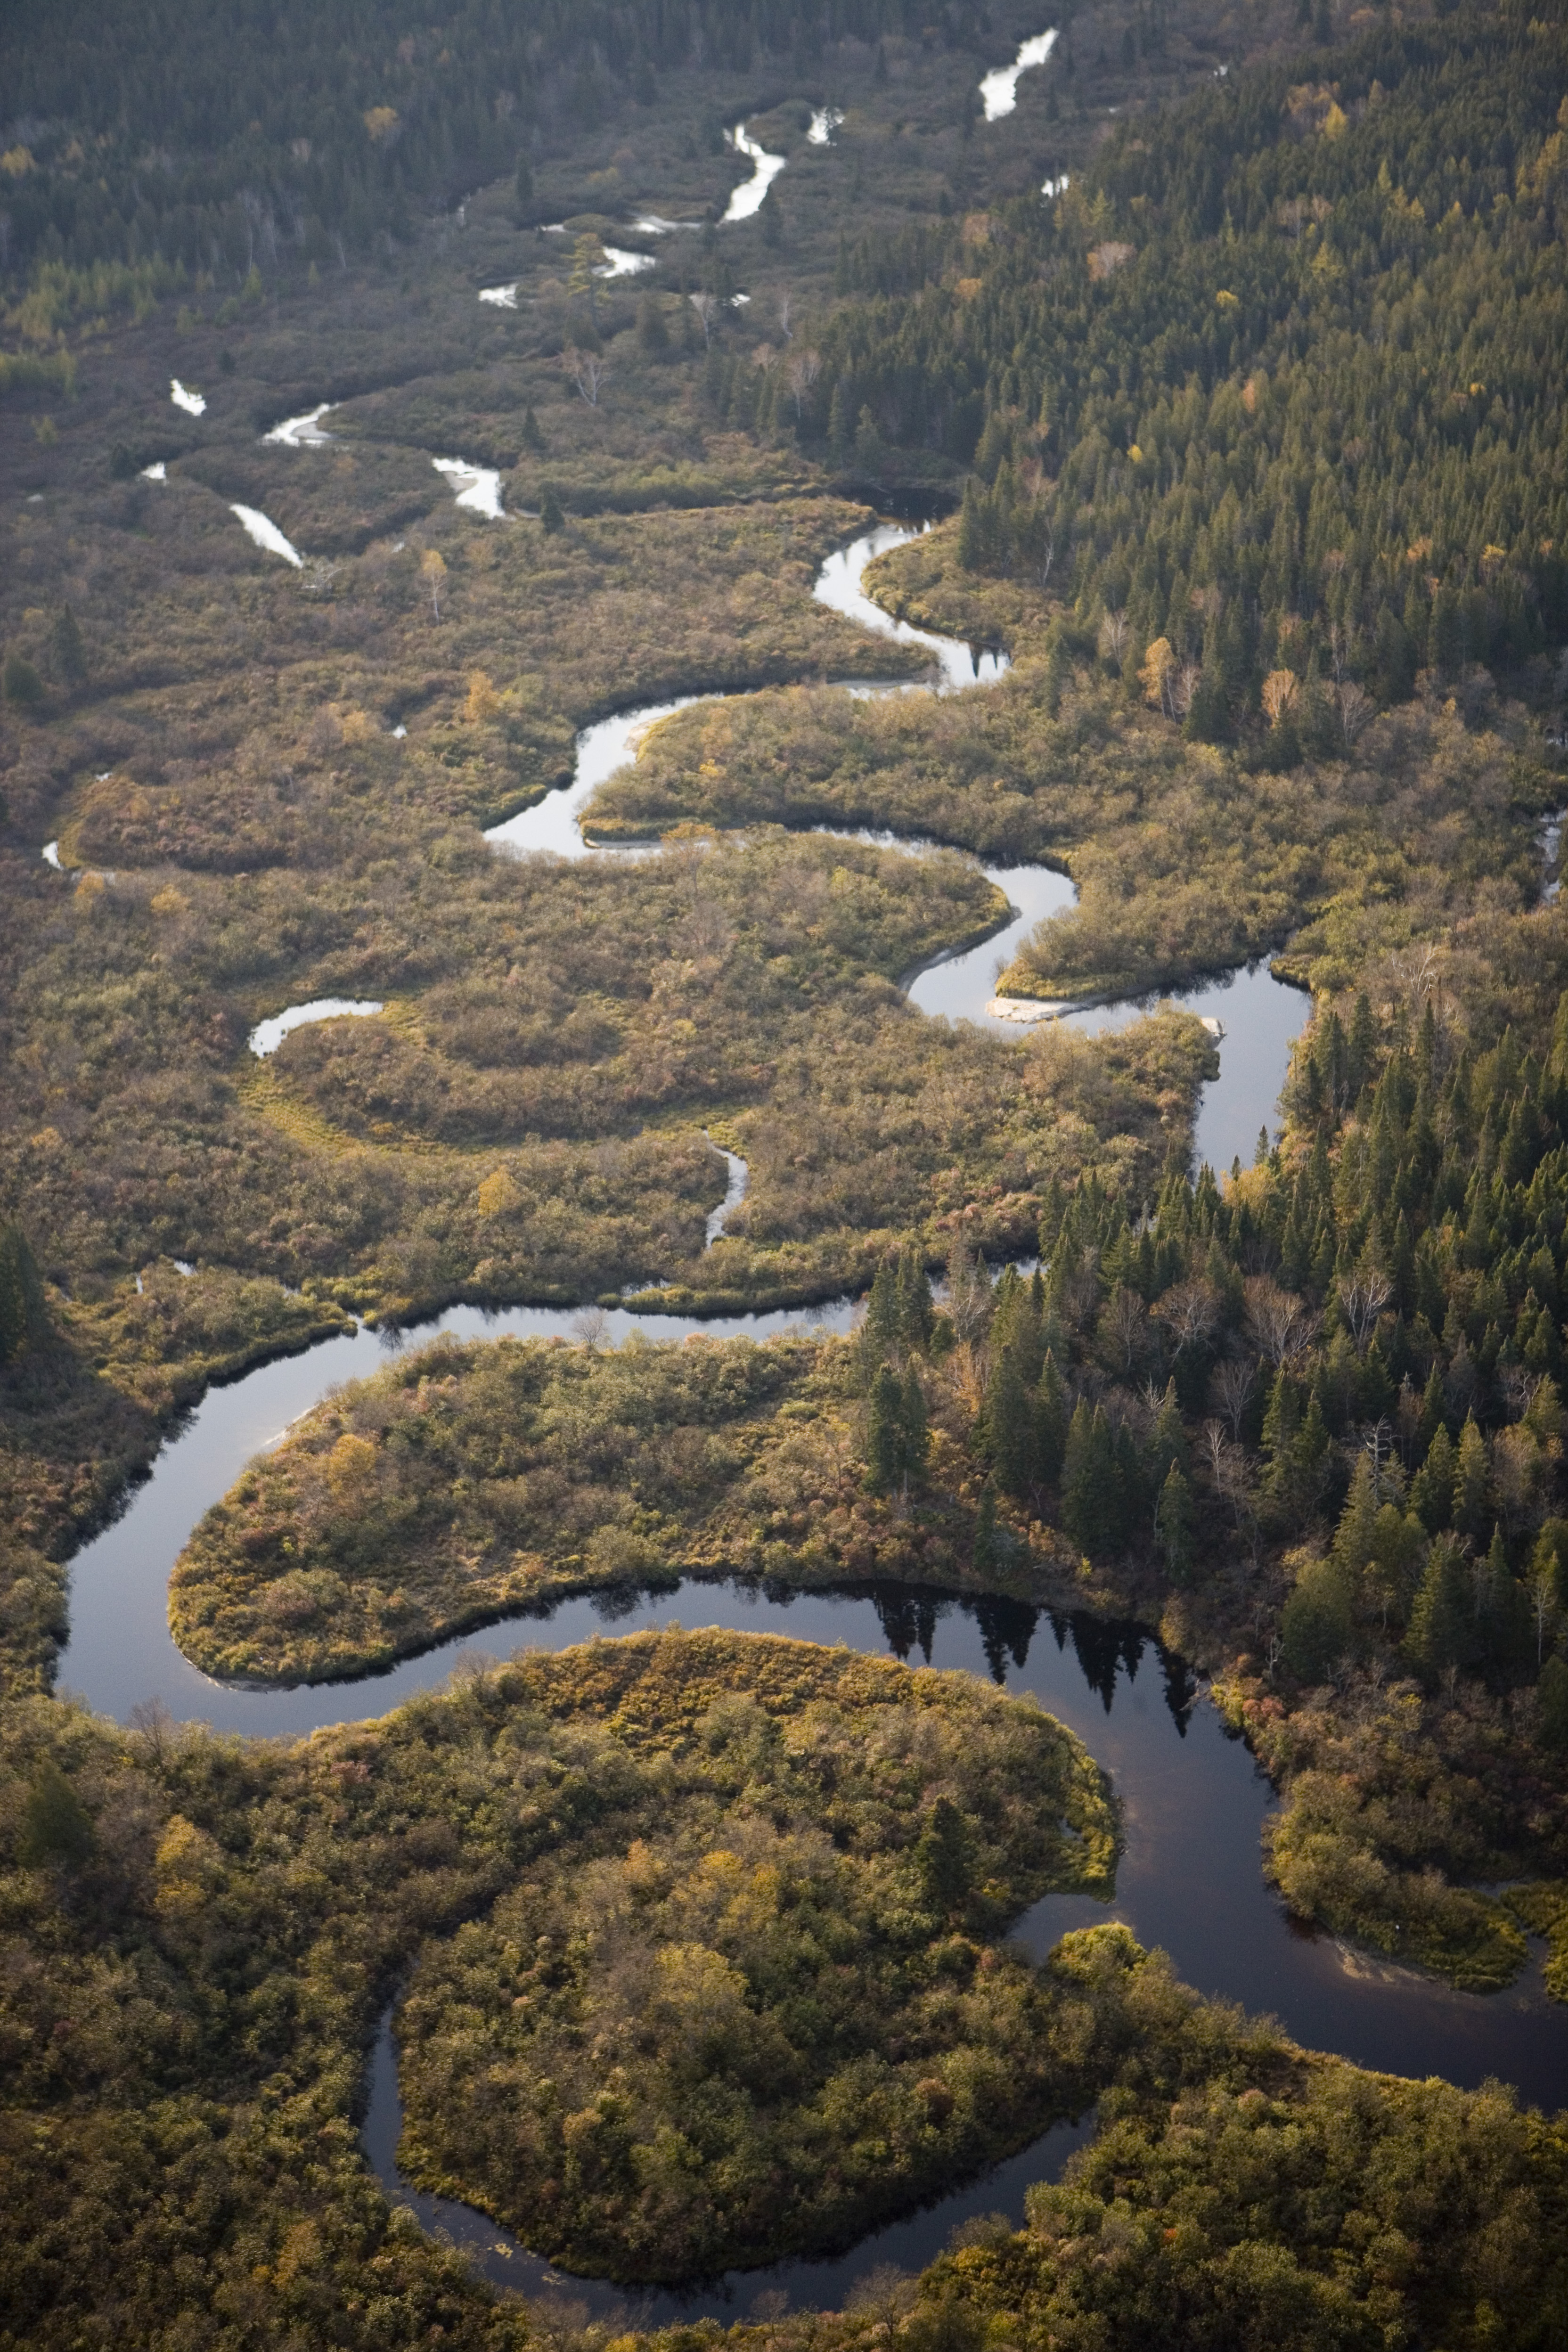 A river snakes through wetlands and forests.